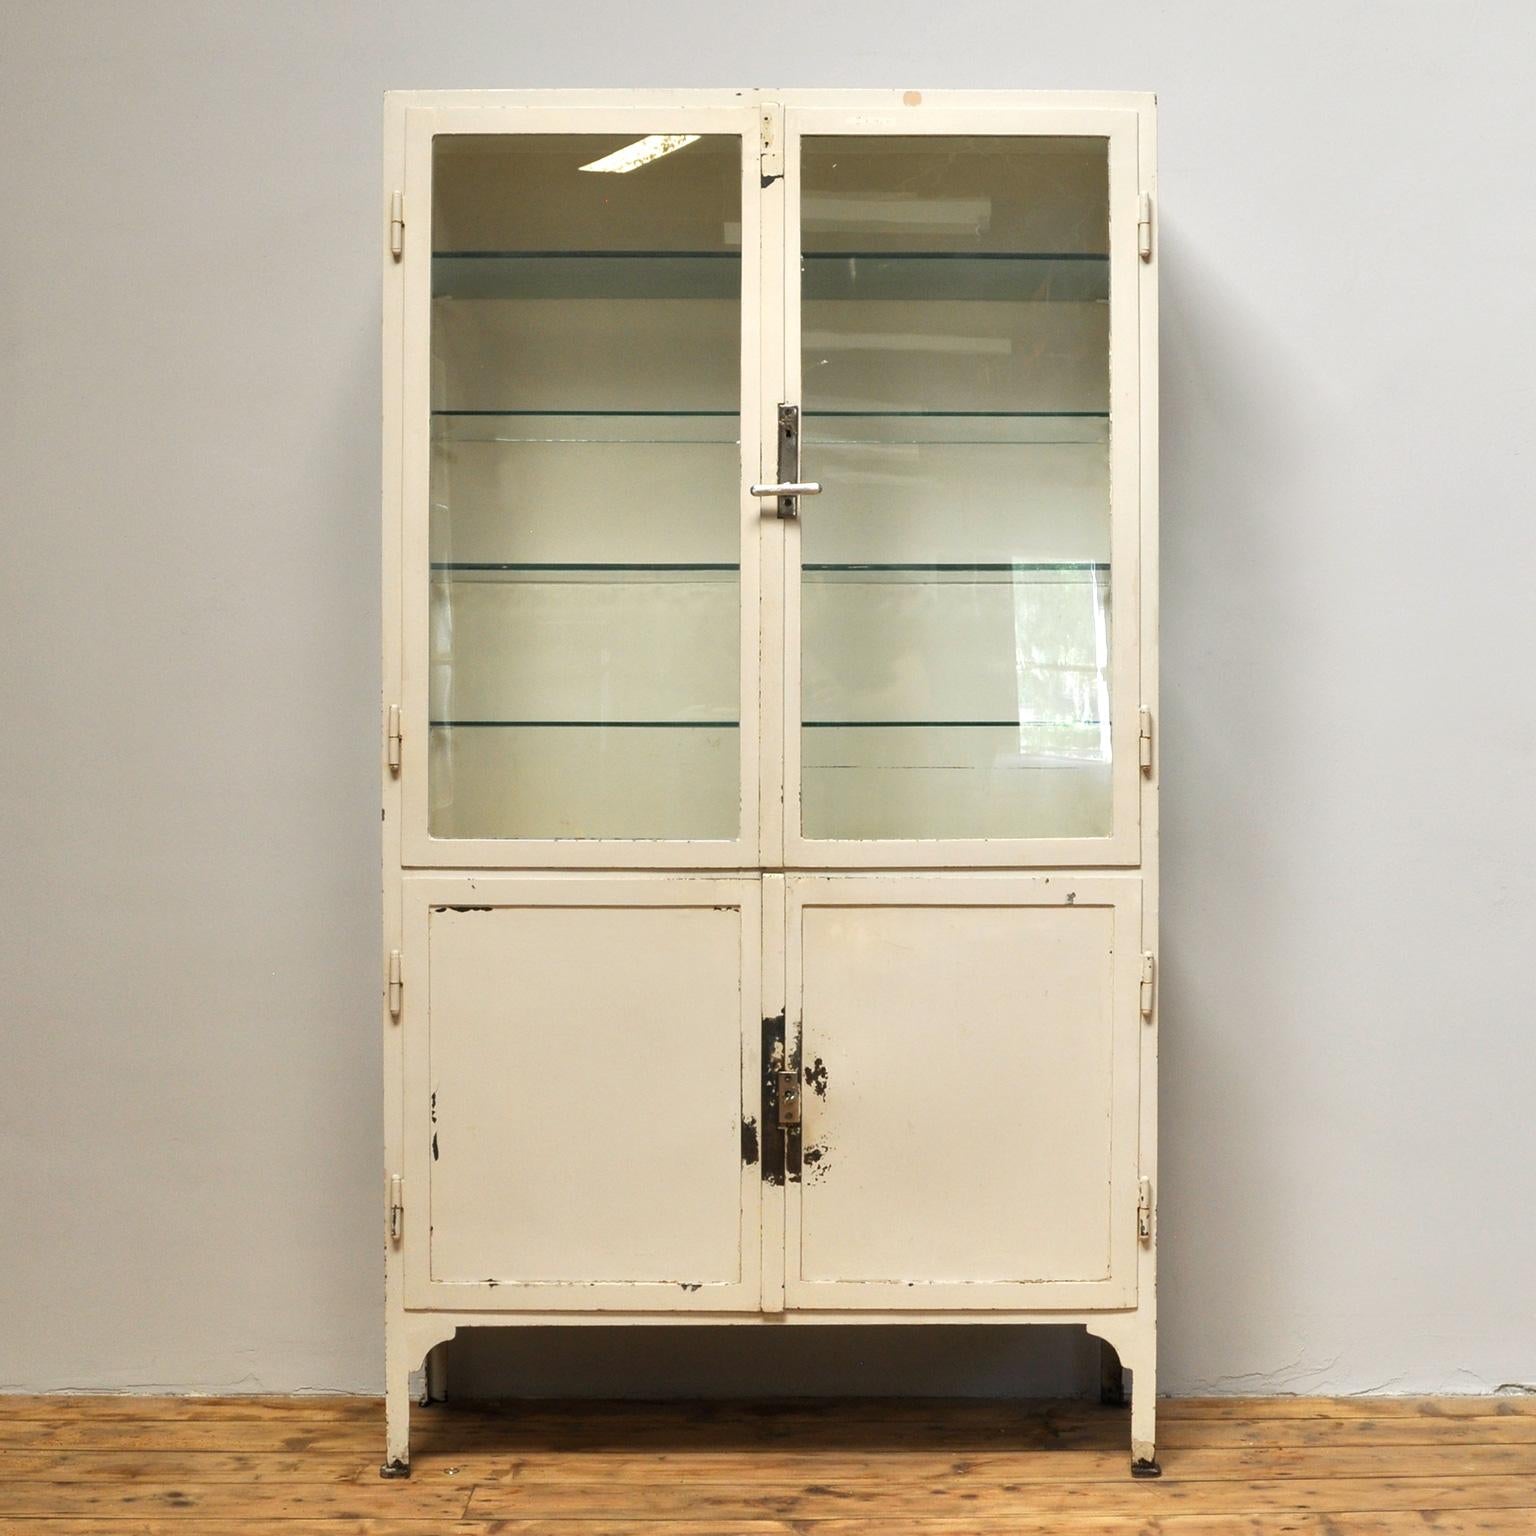 Medical cabinet, produced in de 1940s in Hungary. The cabinet is made of thick iron and antique glass. In the upper part the four glass shelves. In the lower part one iron shelf. The cabinet has a very nice patina, some chips of paint missing. The